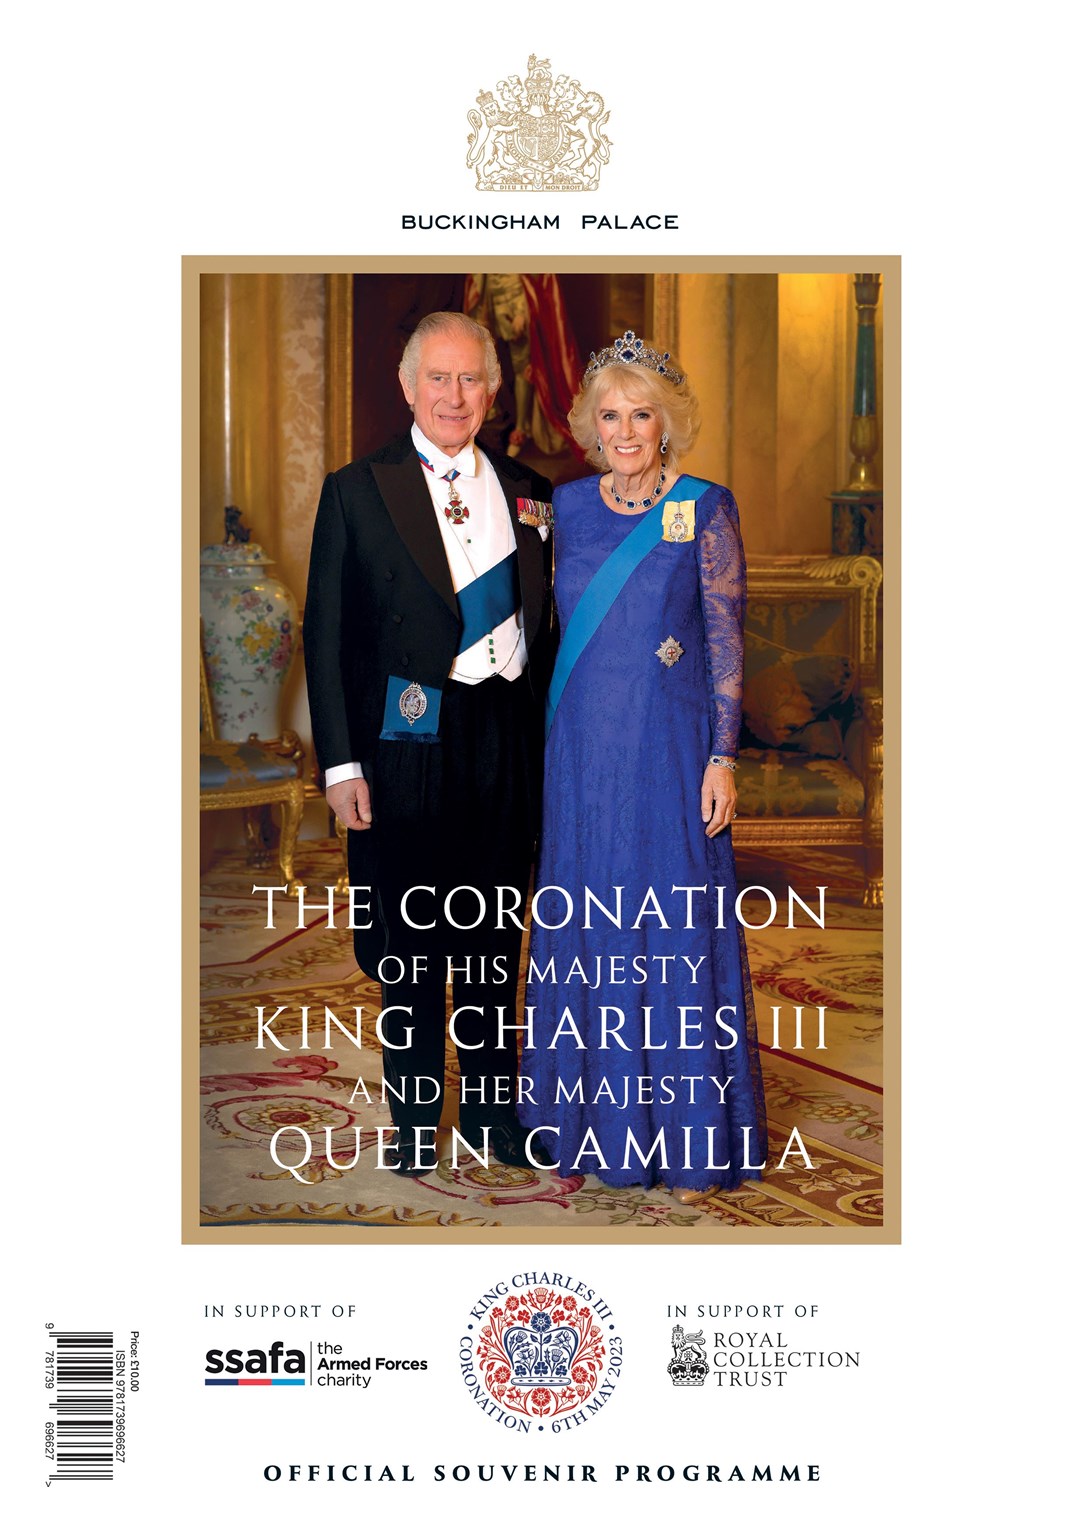 The the front cover of the official souvenir programme celebrating the coronation of King Charles III and the Queen Consort (Publications UK Ltd/PA)